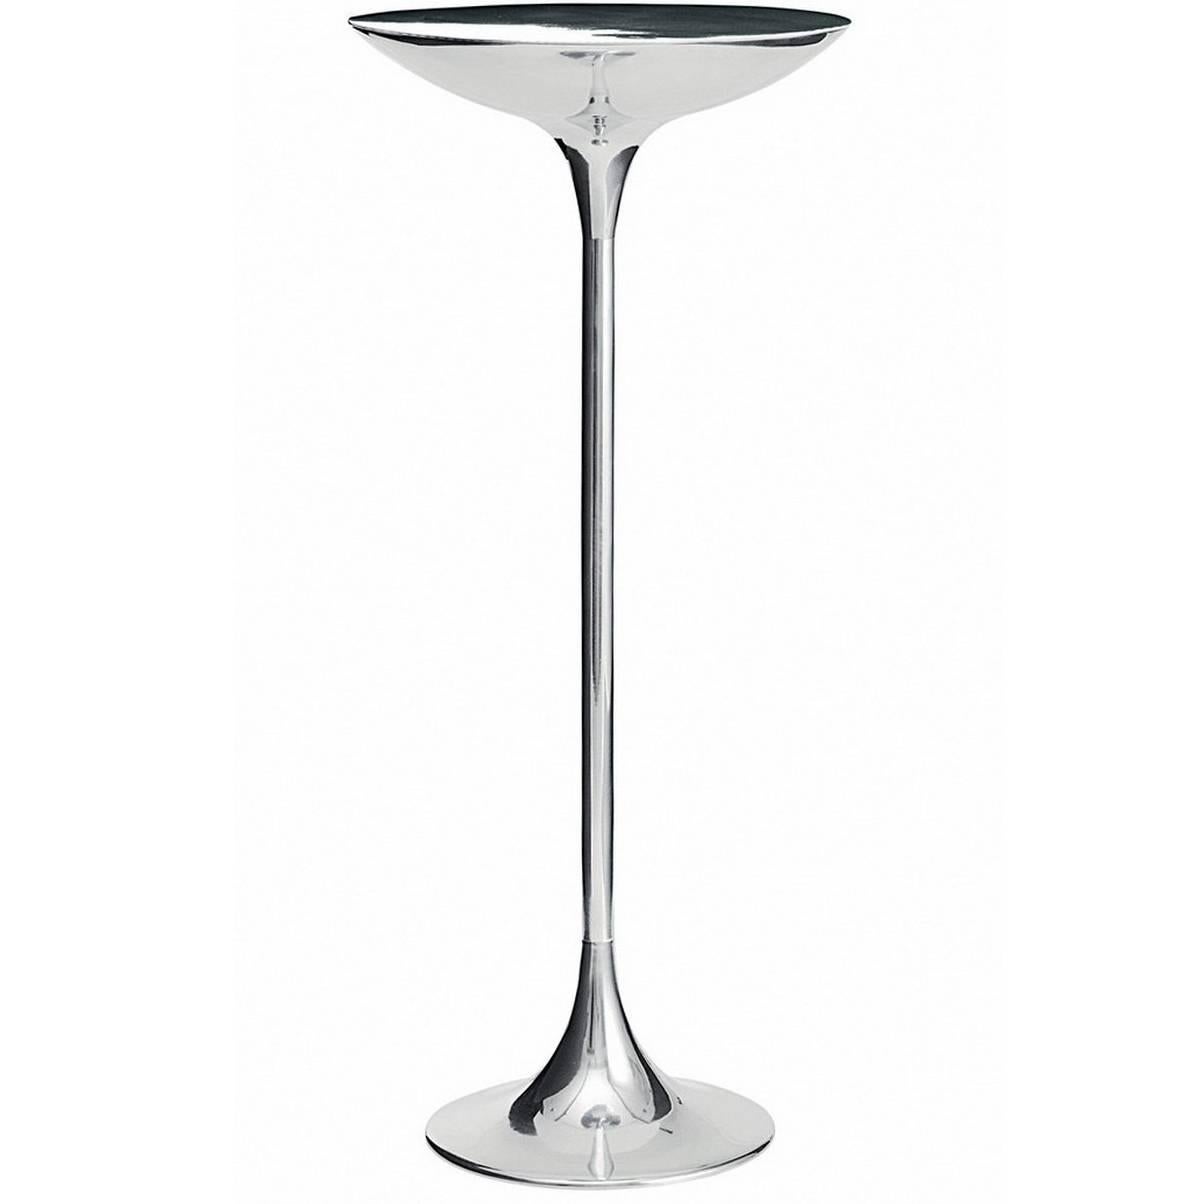 "Ping II" Polished Aluminum Small Table by Giuseppe Chigiotti for Driade